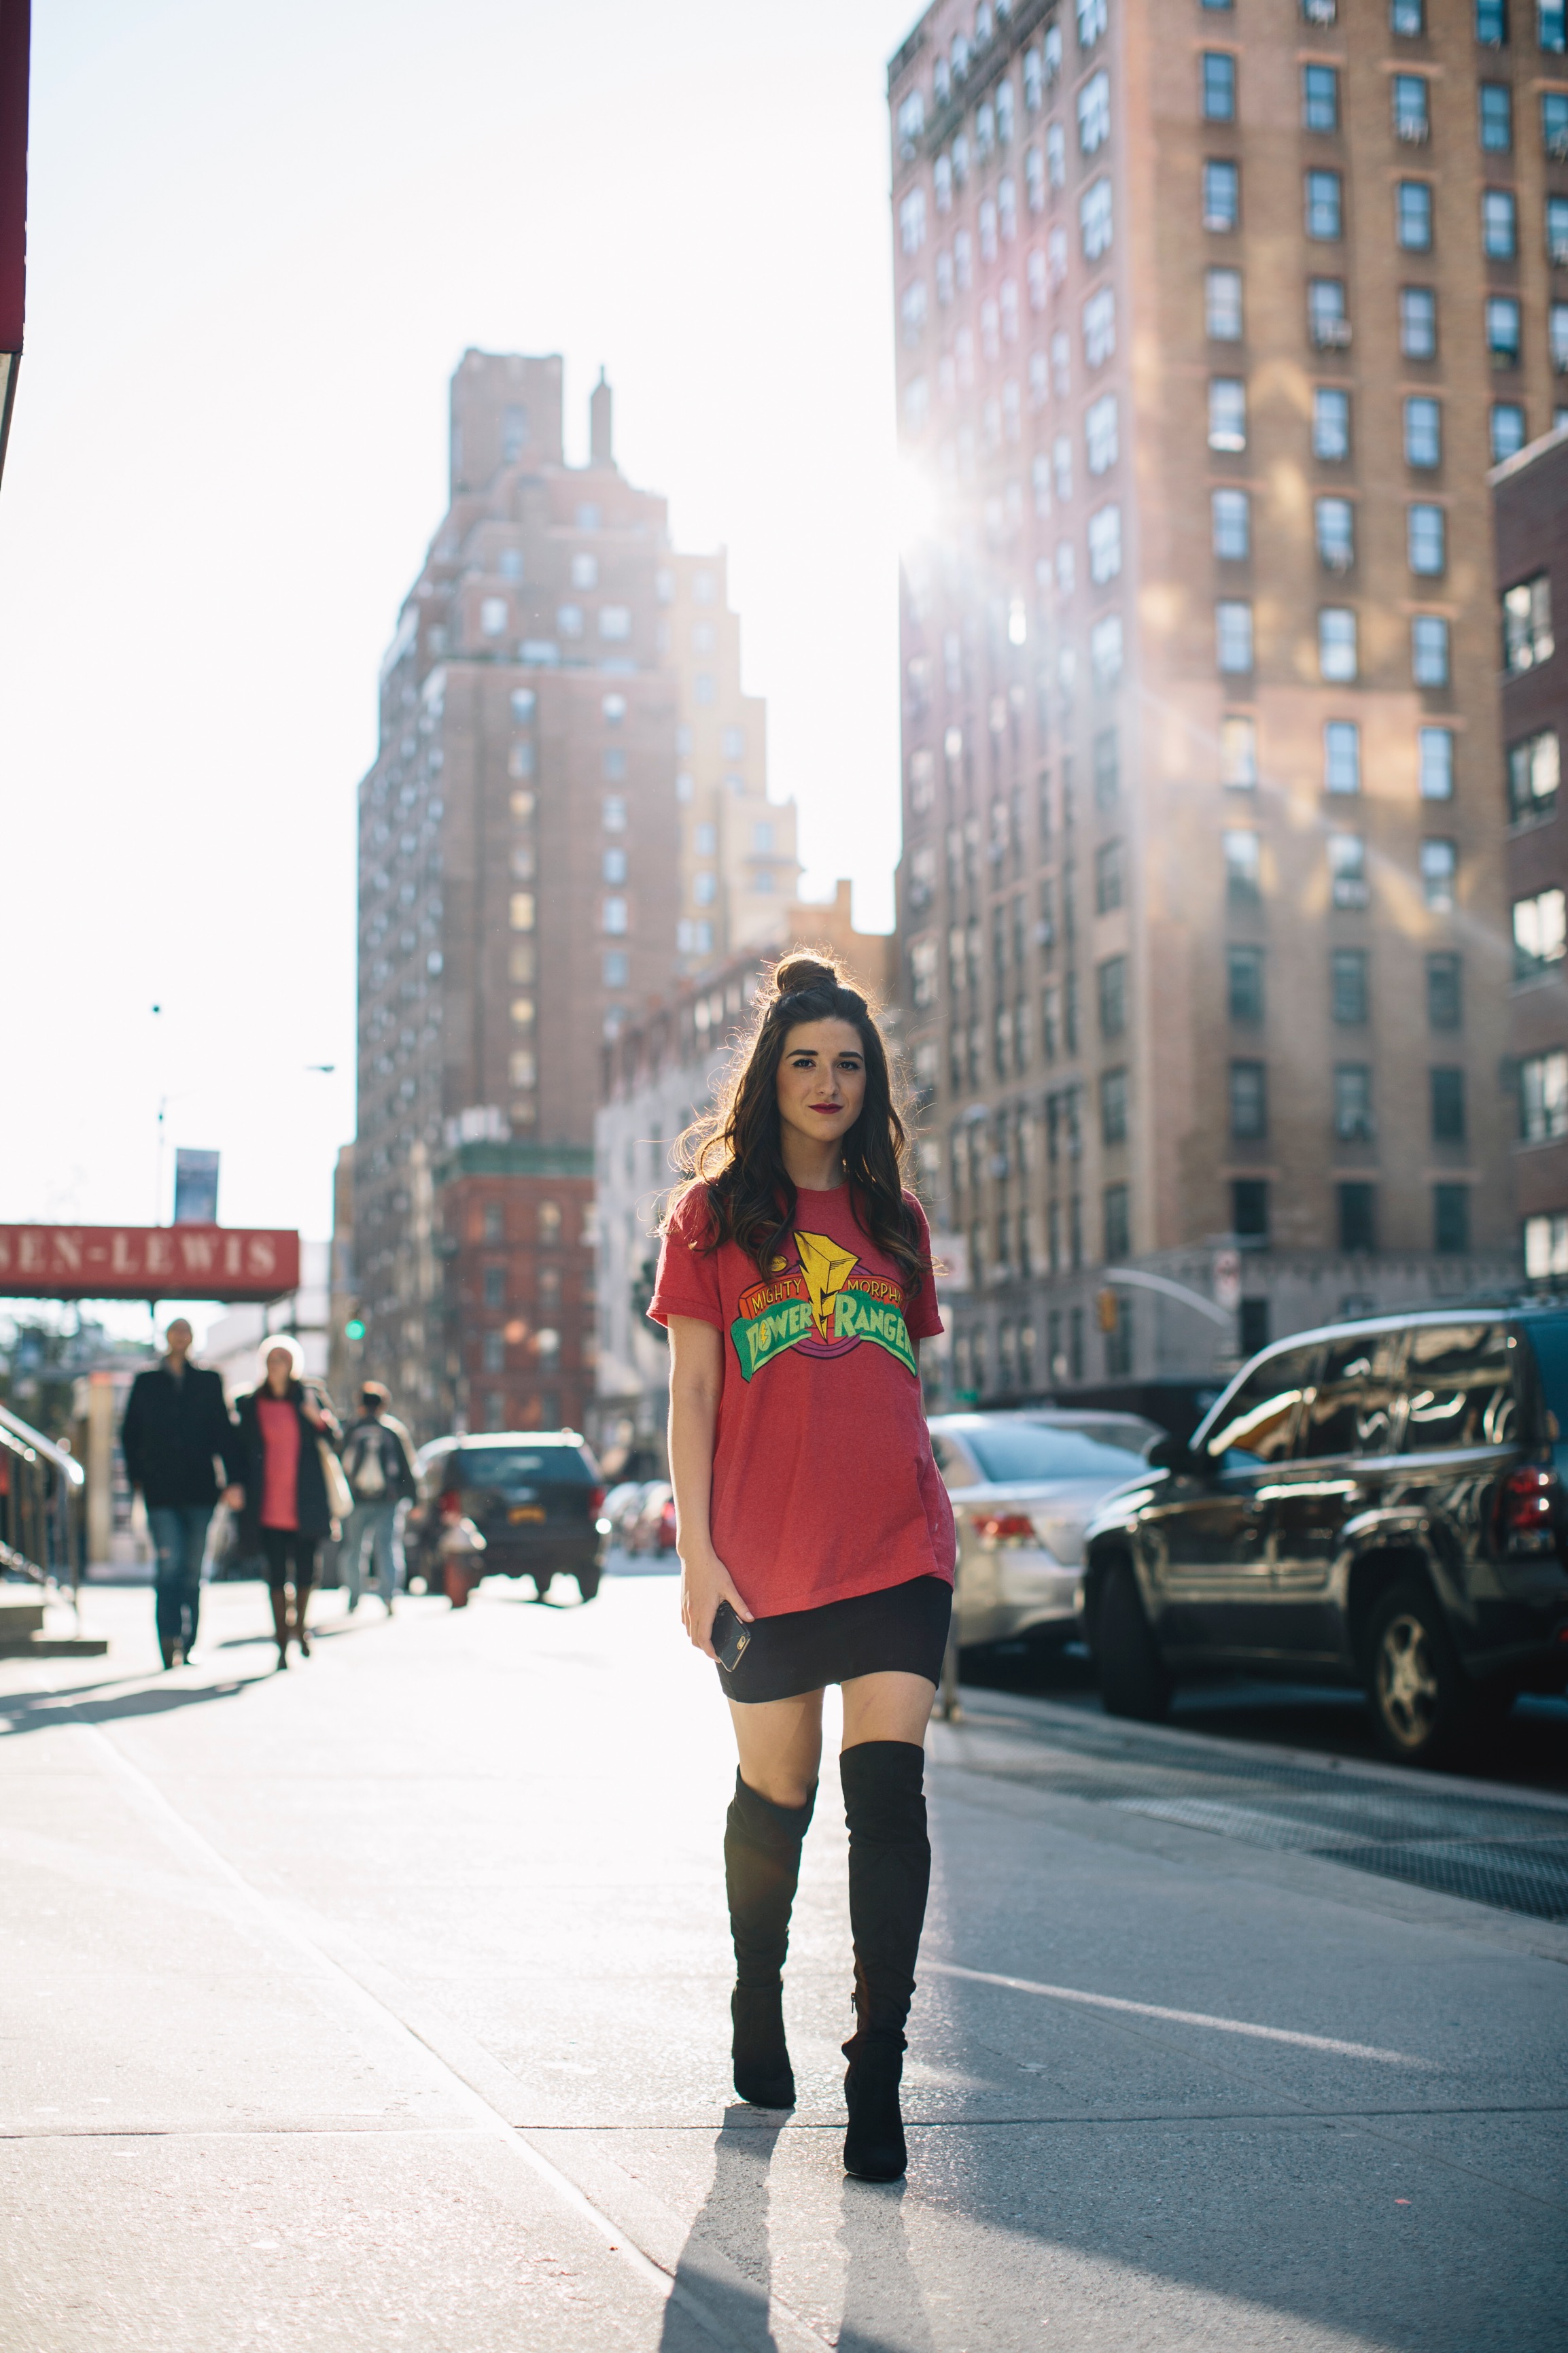 Power Rangers Tee + OTN Boots Hashtag Blogger Problems Louboutins & Love Fashion Blog Esther Santer NYC Street Style Blogger Outfit OOTD Trendy Red Top Black Mini Skirt Girl Women What To Wear Shopping Phone Hair Topknot Bun Fun  Edgy Graphic T-Shirt.jpg